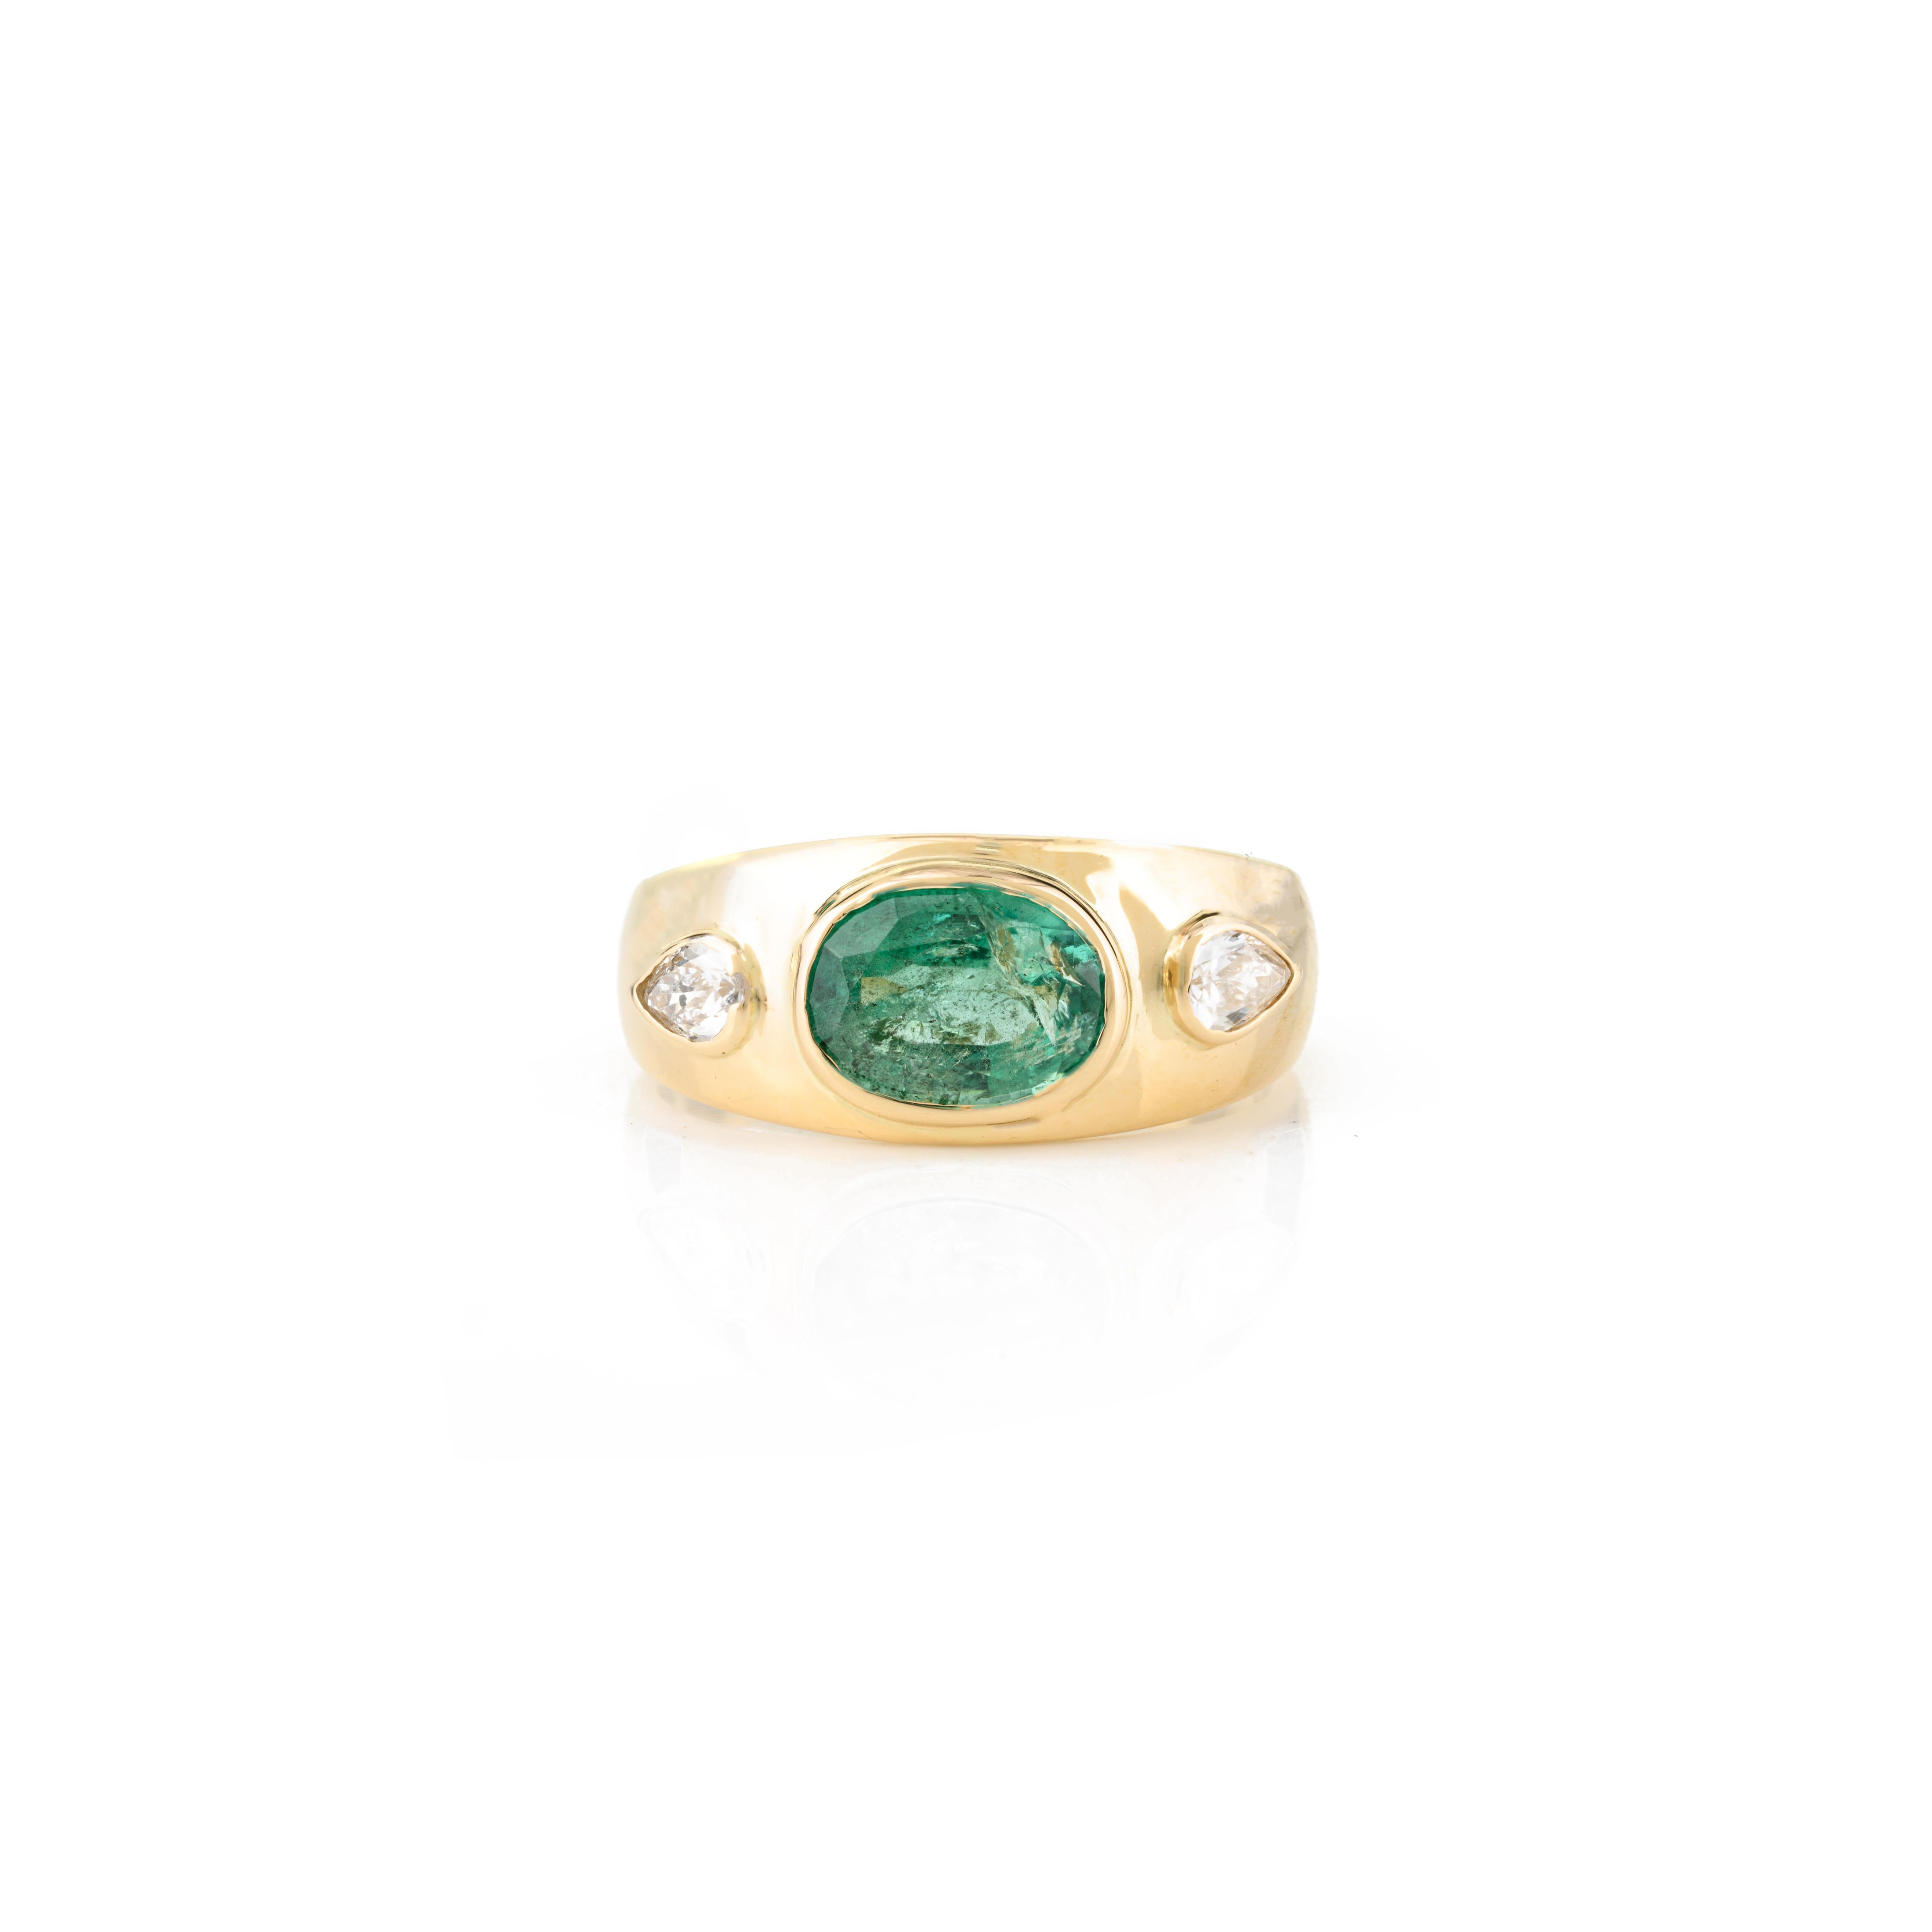 For Sale:  Genuine Emerald Diamond Unisex Engagement Dome Ring in 18k Yellow Gold 8